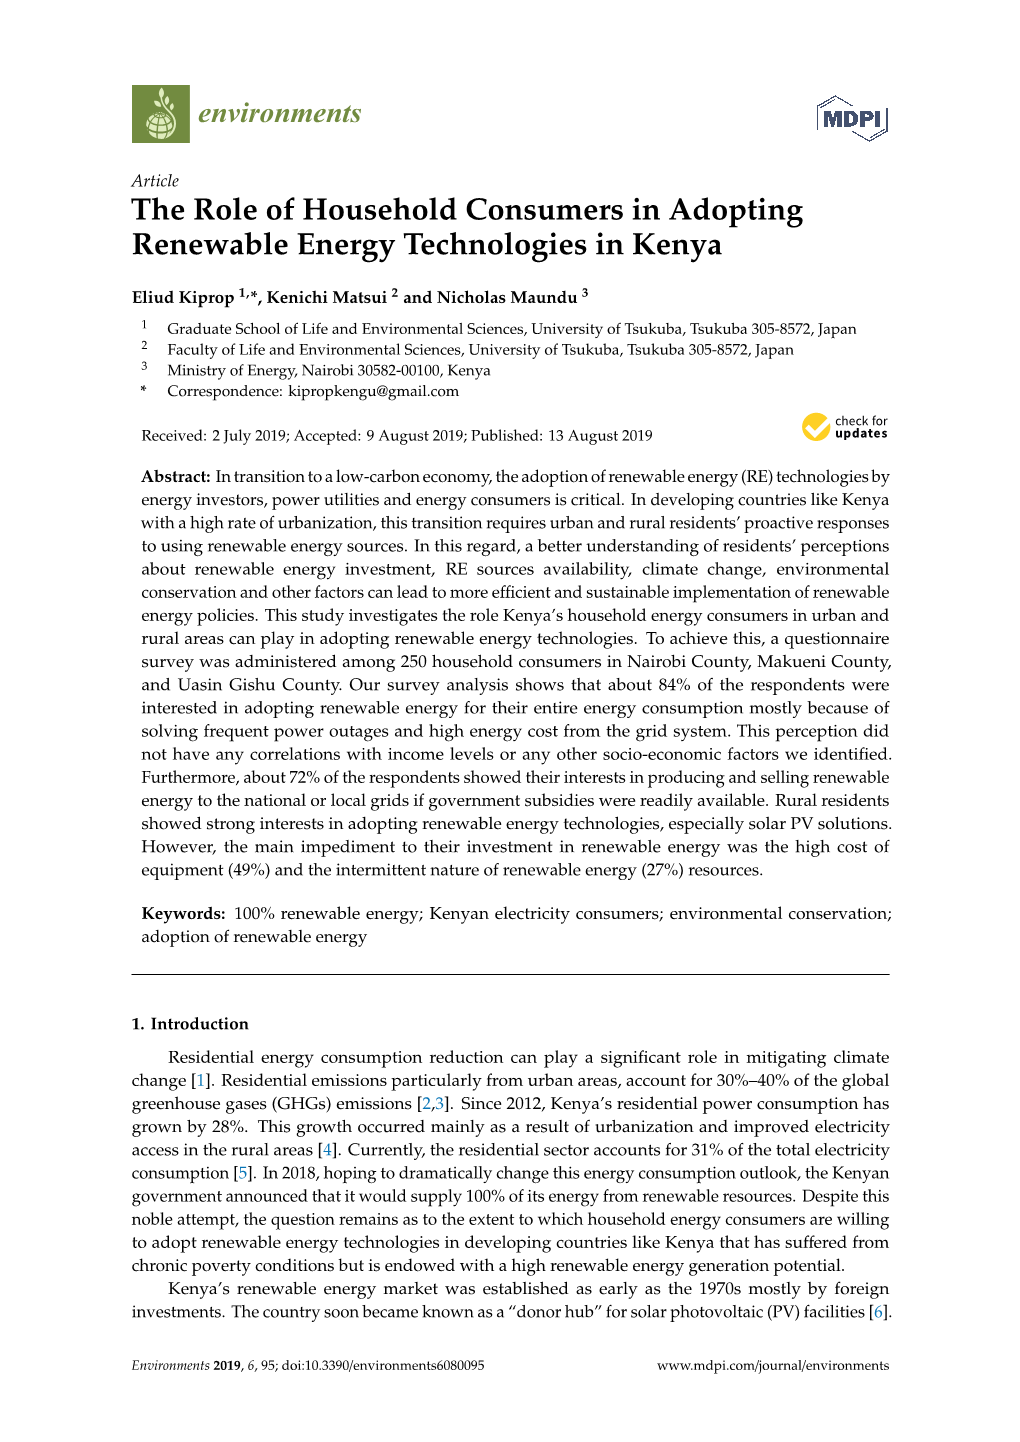 The Role of Household Consumers in Adopting Renewable Energy Technologies in Kenya